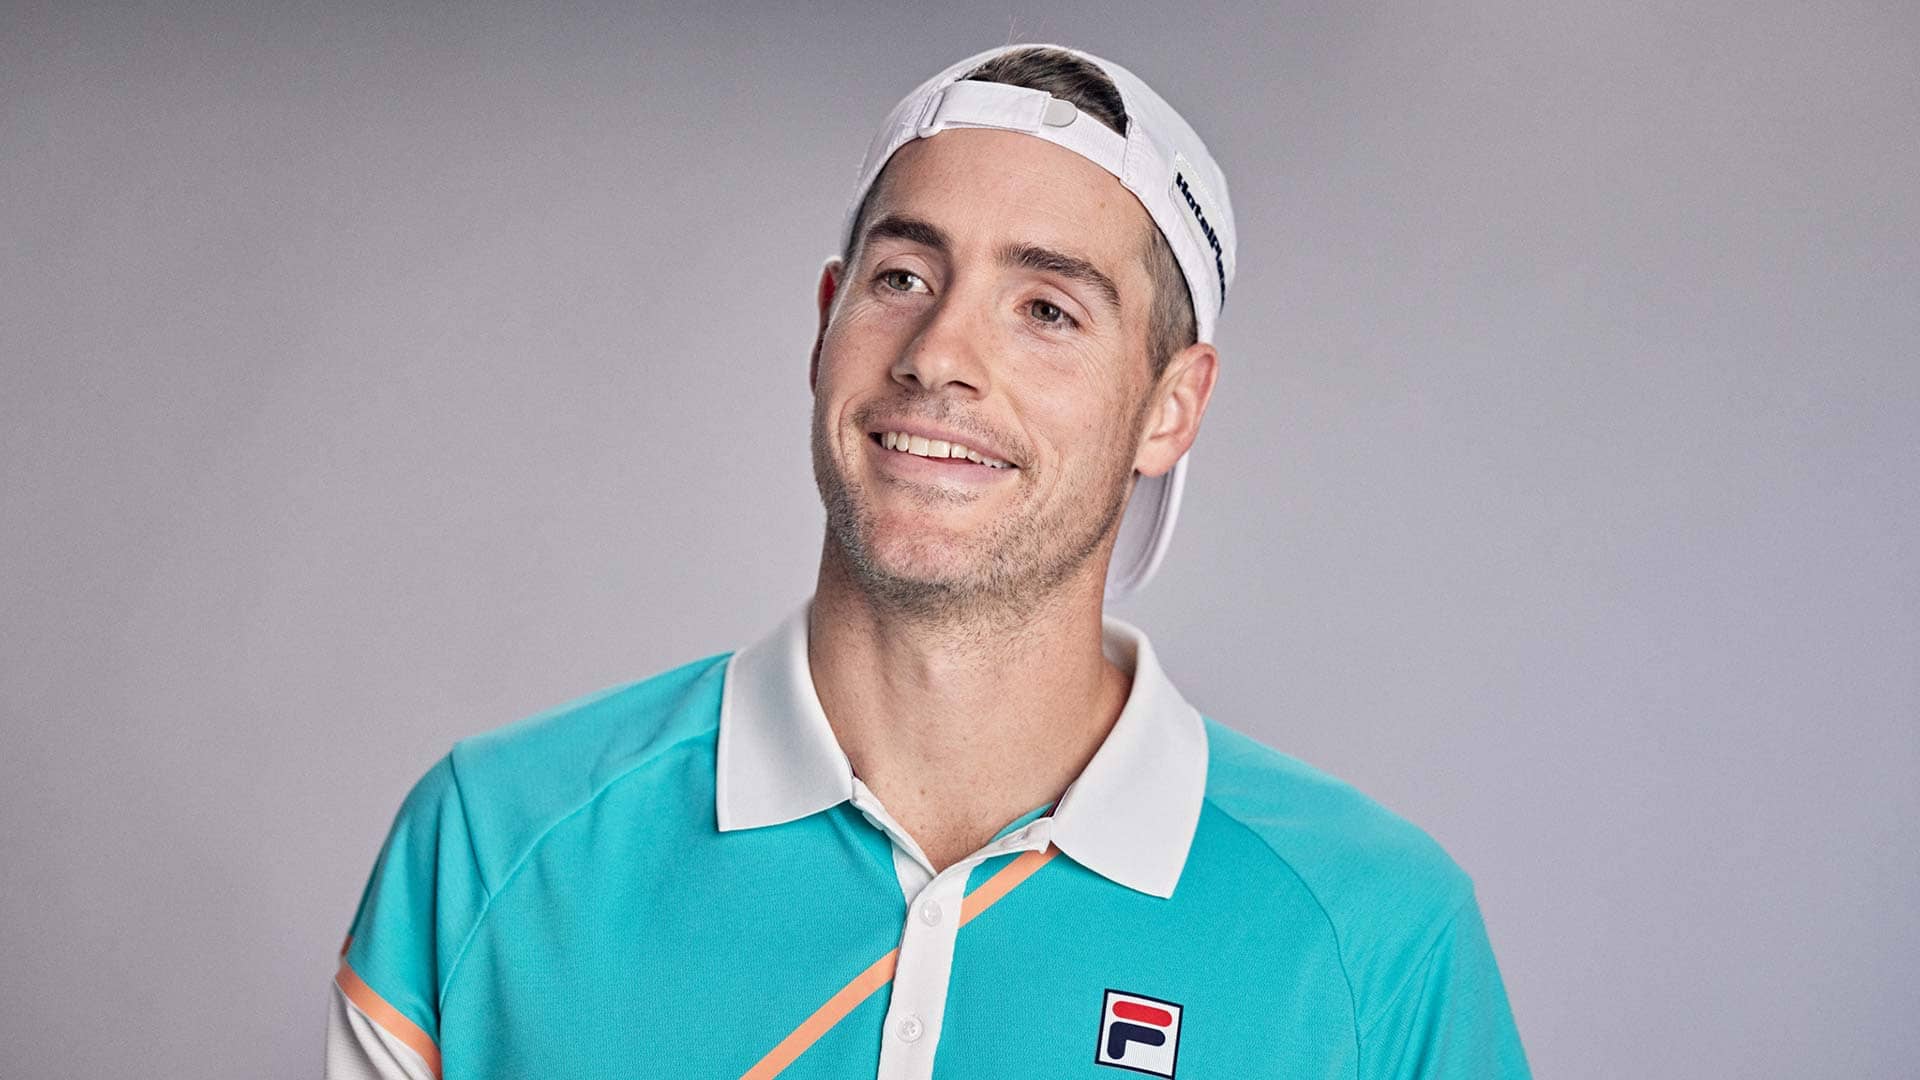 The 37-year-old is the oldest player in the Top 100 of the Pepperstone ATP Rankings.